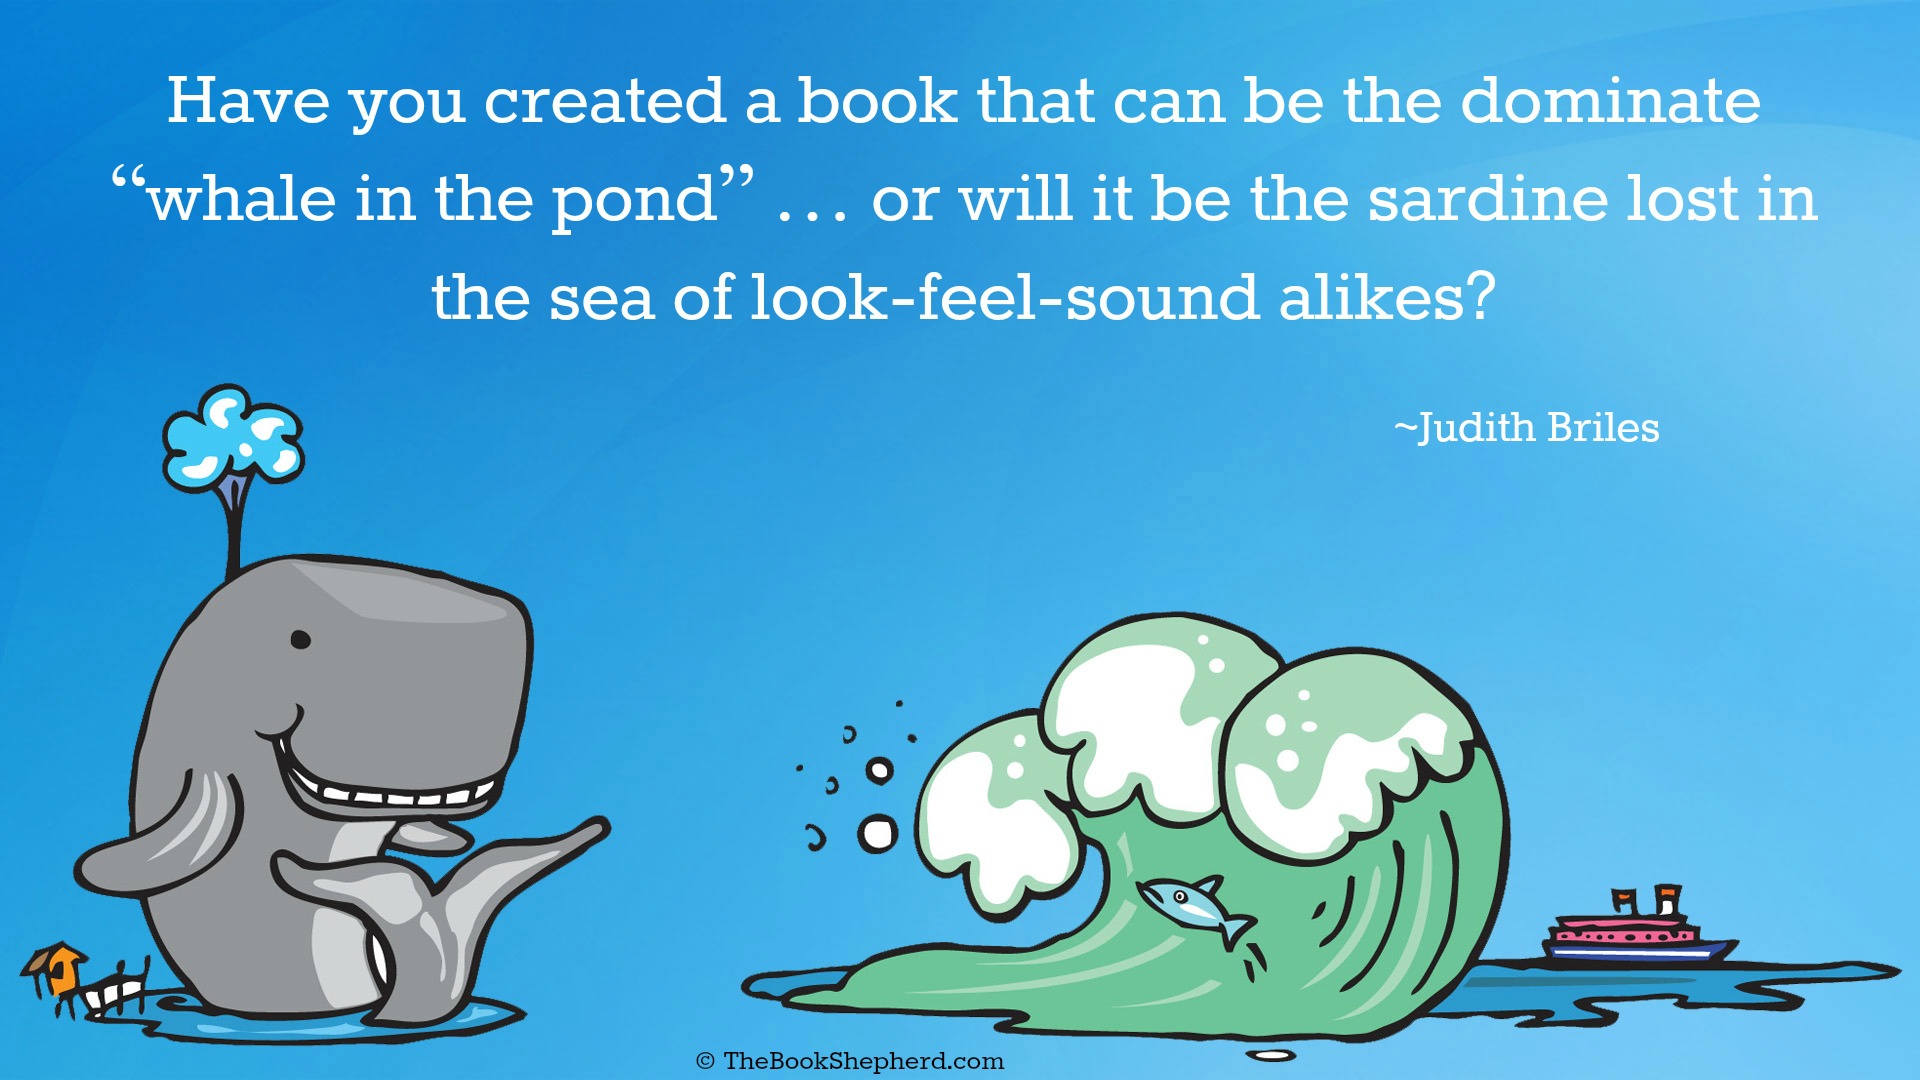 Are You Lost in the Sea of Books? Are You a Mere Sardine in the Sea?